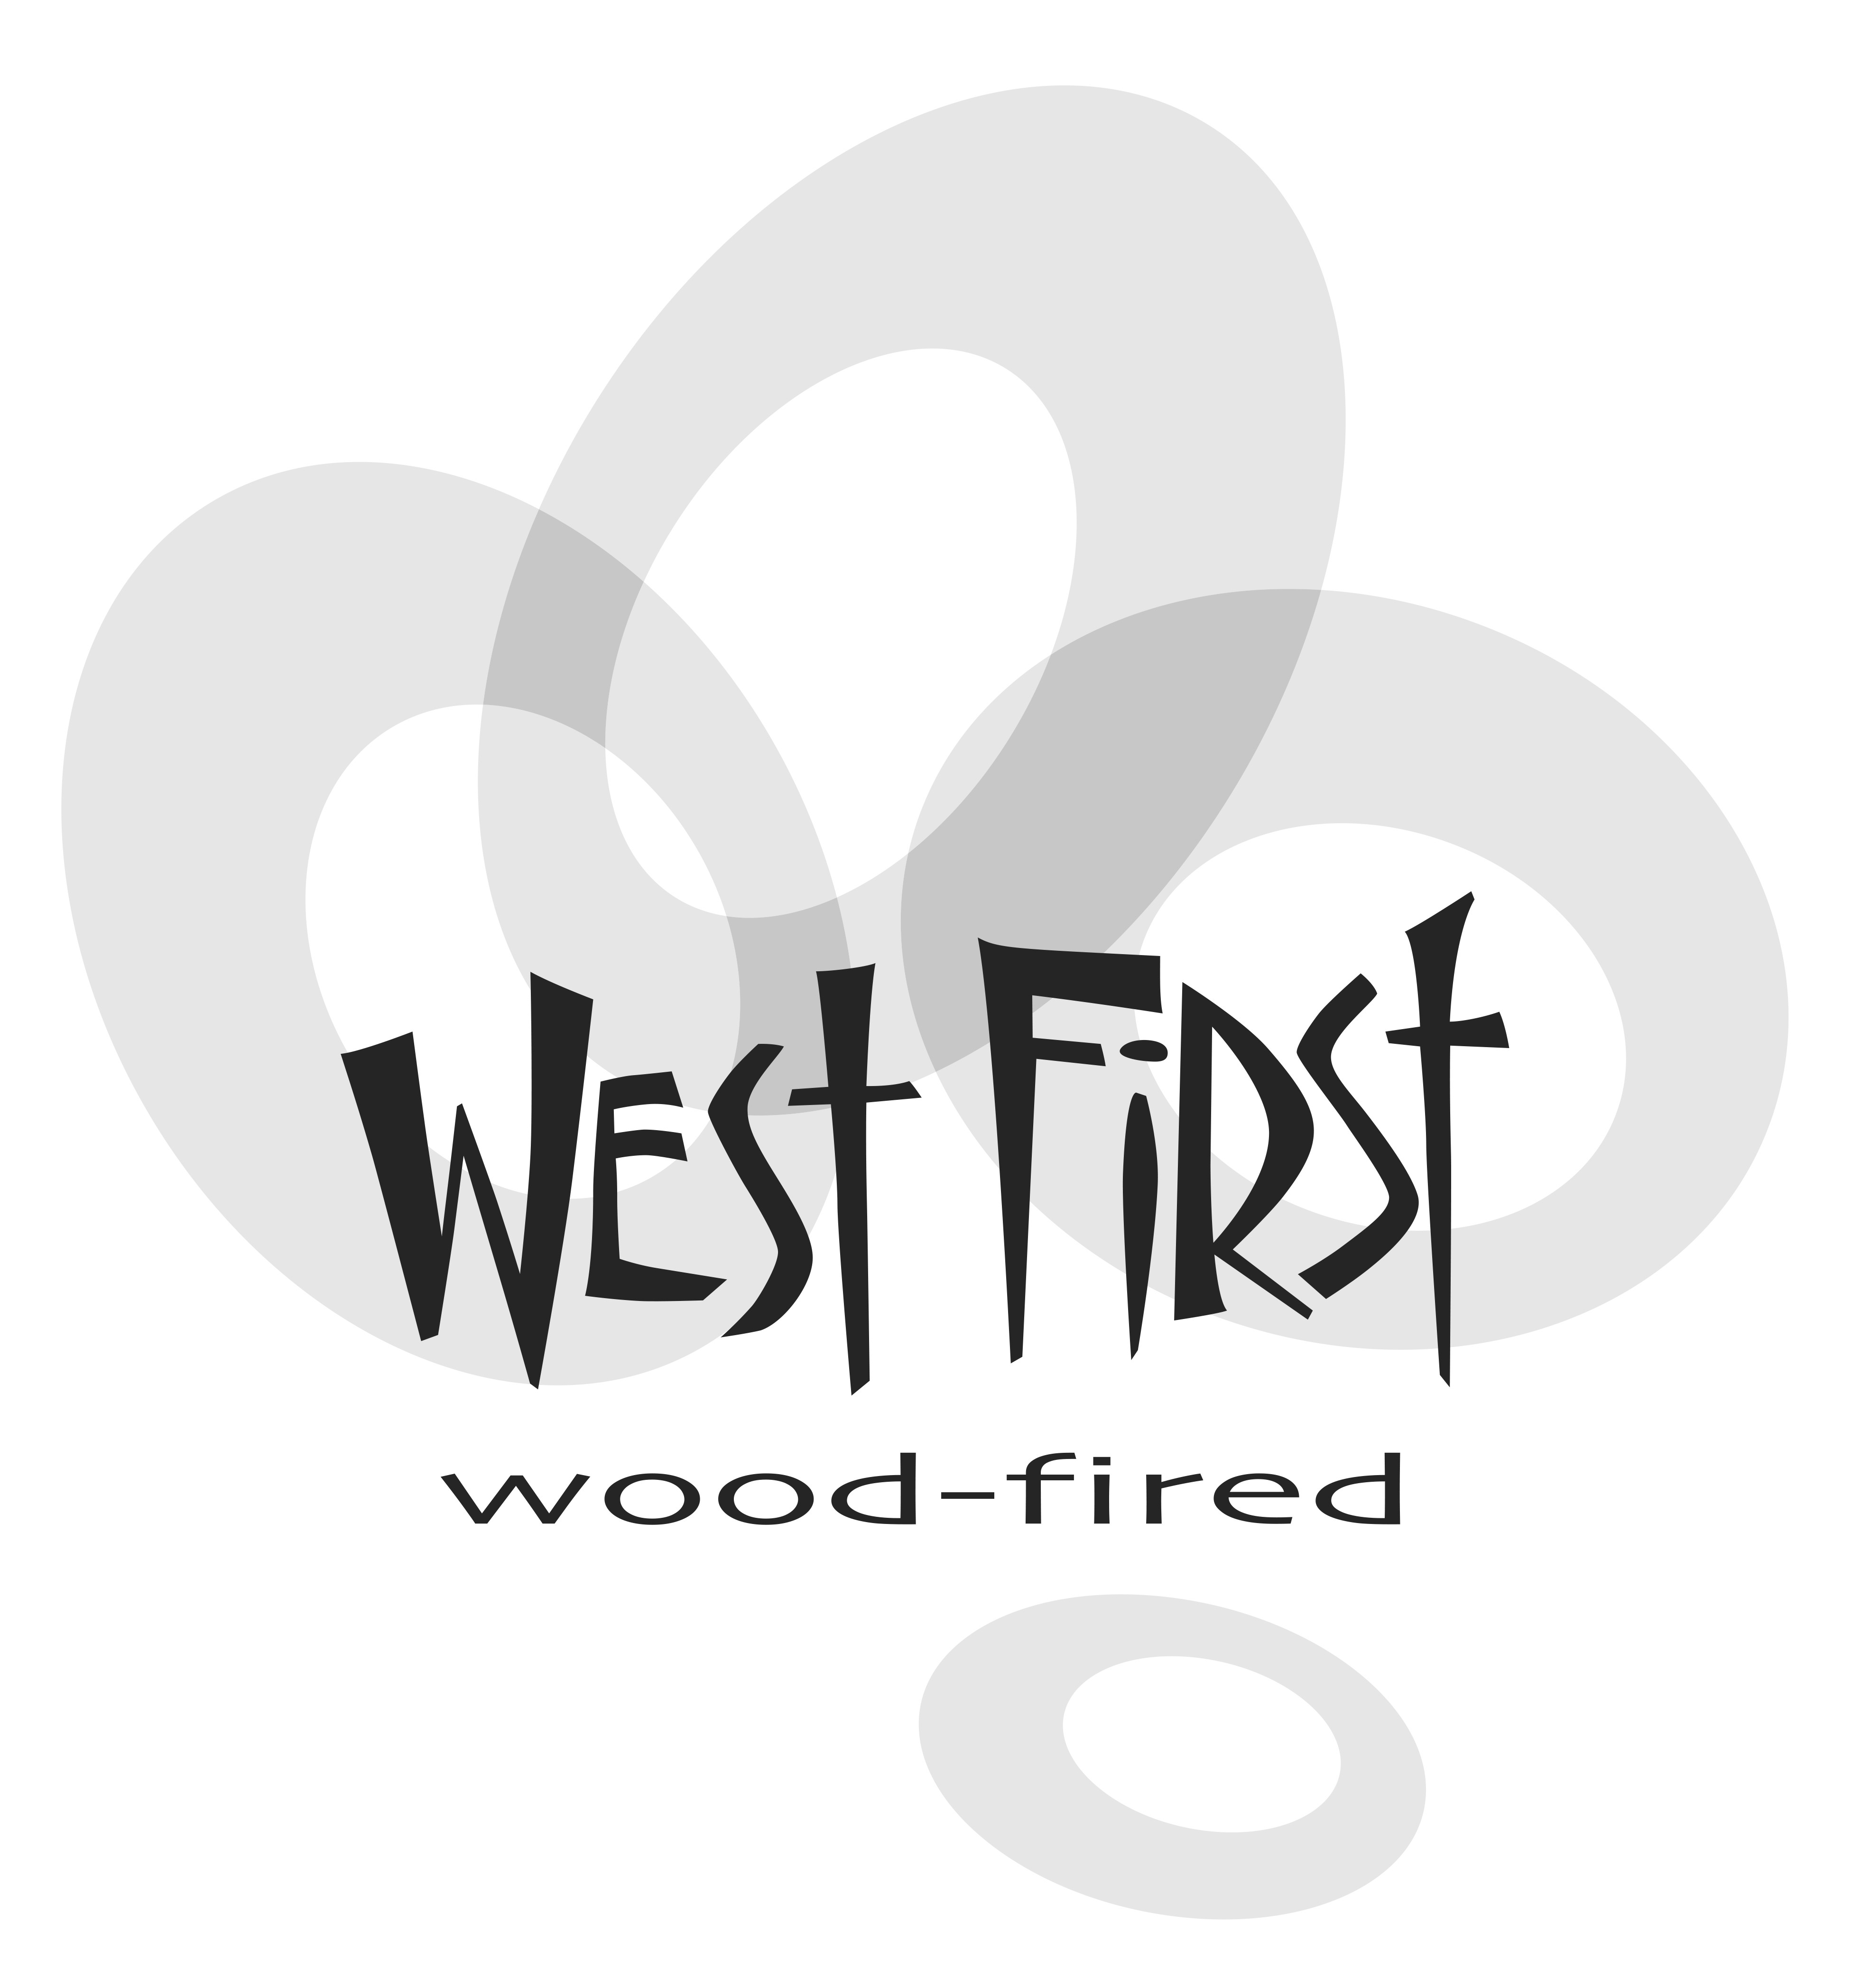 West First Wood-Fired 101B 1st Avenue West